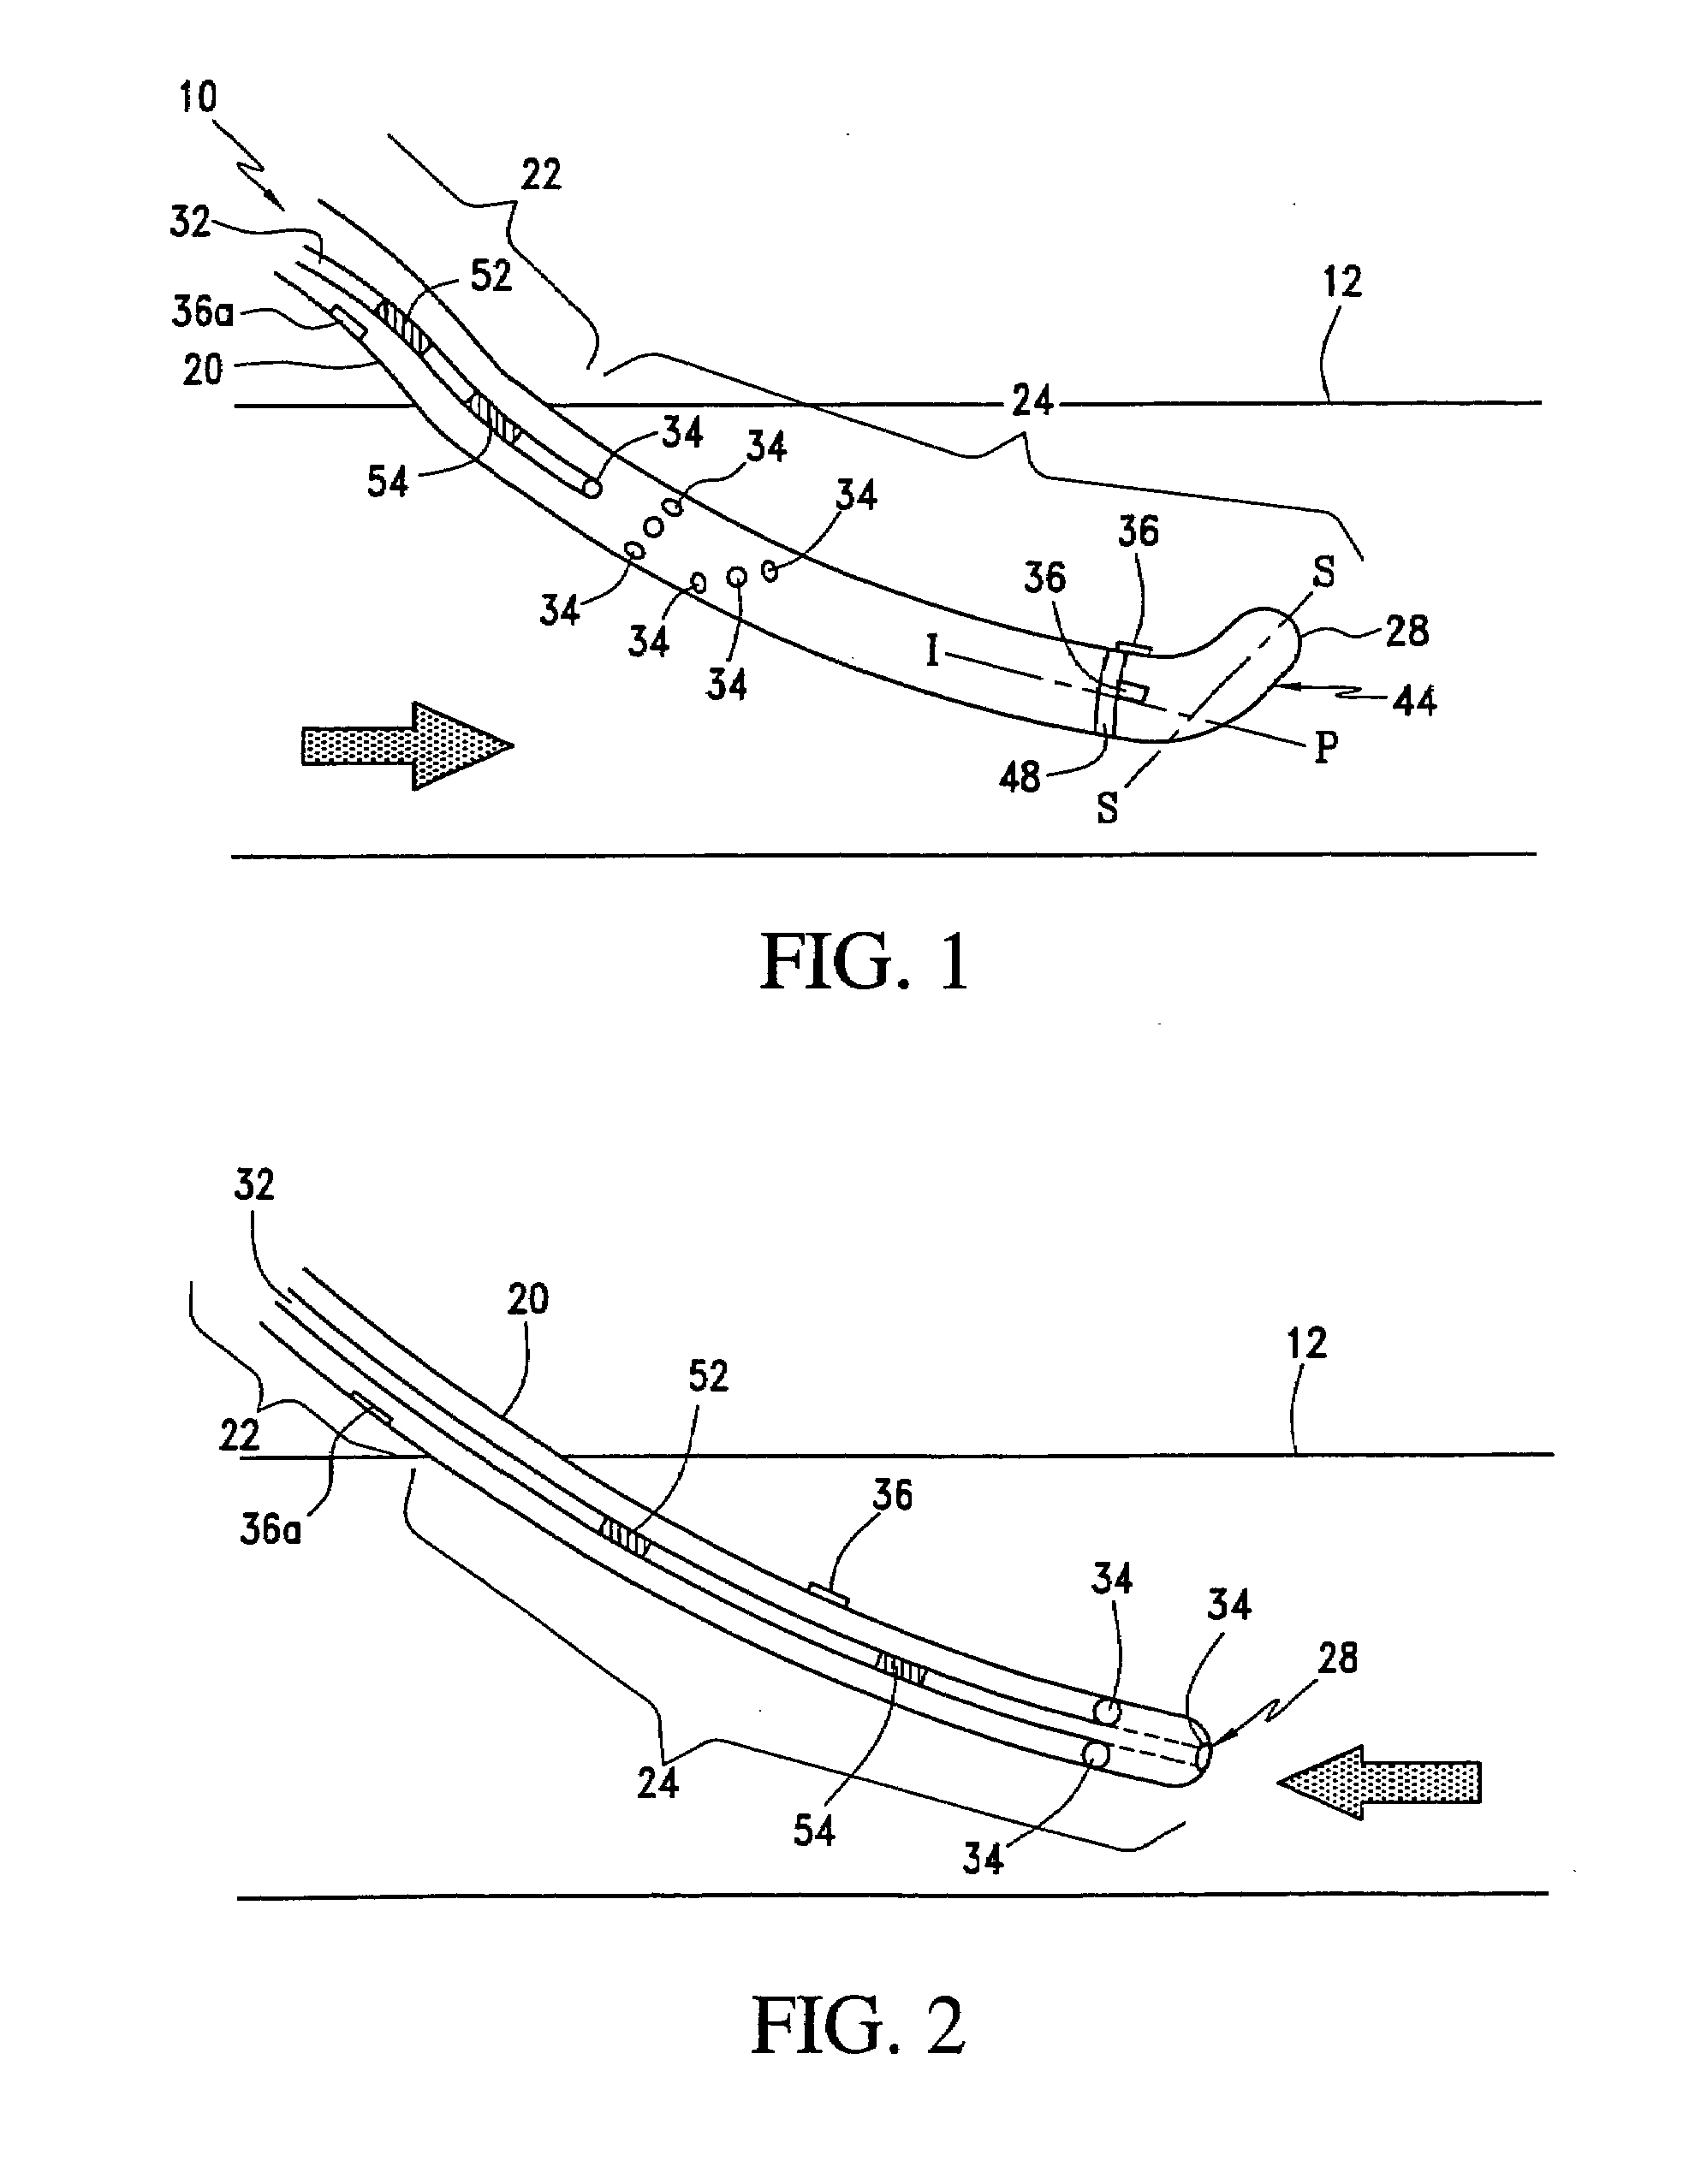 Compensation method for thermodilution catheter having an injectate induced thermal effect in a blood flow measurement